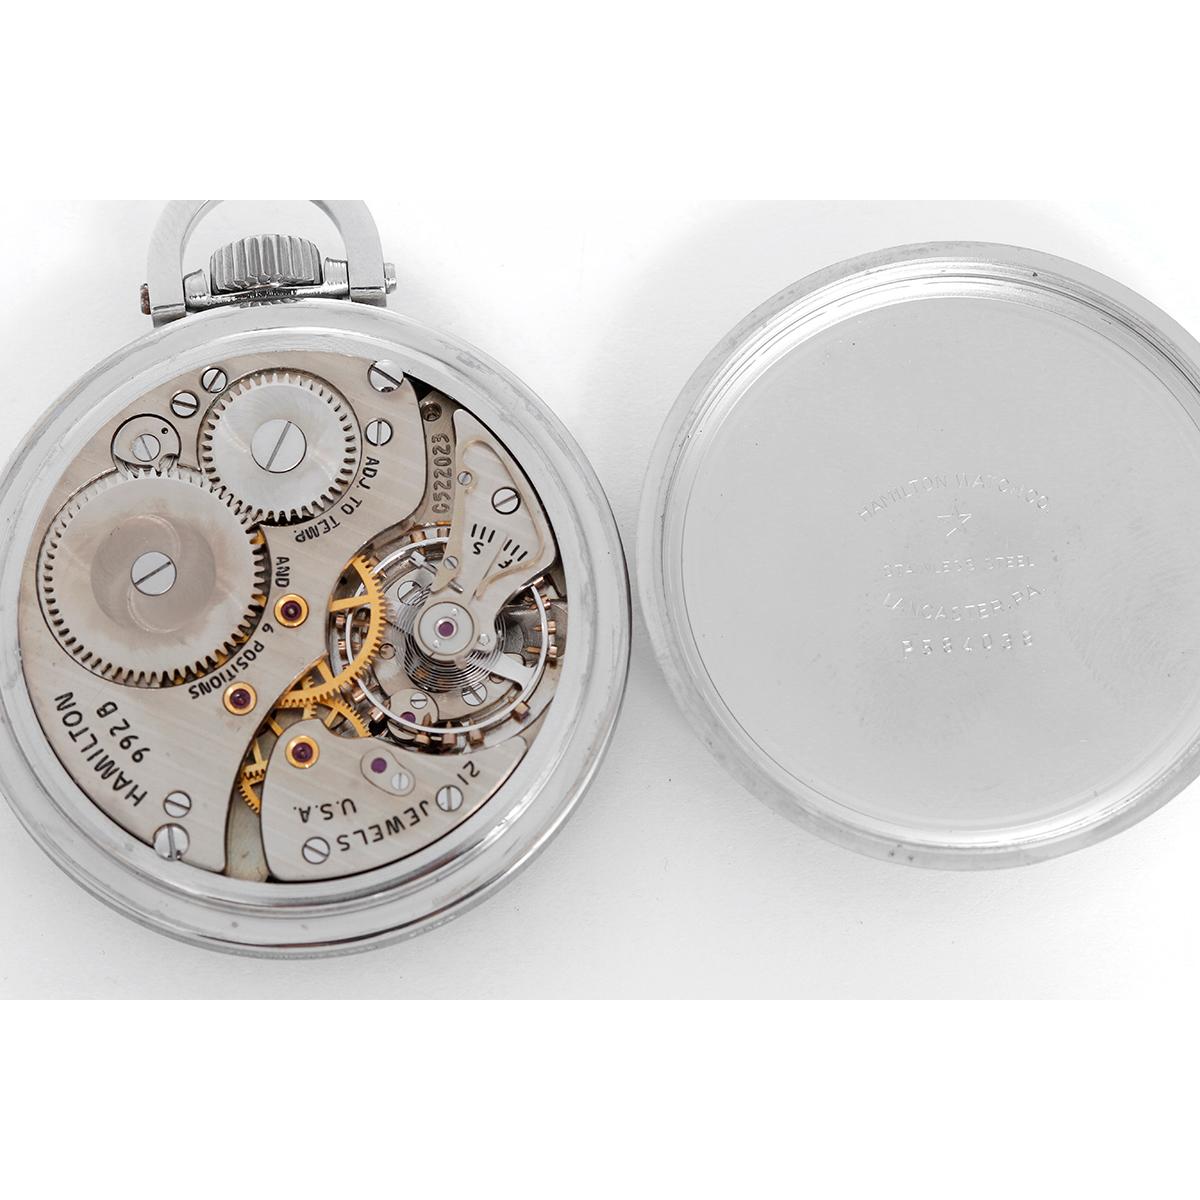 Hamilton Stainless Steel Railway Special Pocket Watch 922 B - Manual winding; 21 jewels.. Stainless steel case (50mm). White enamel Hamilton double sunk Montgomery dial, features ornate black Arabic hour numerals and block minute numerals. The dial